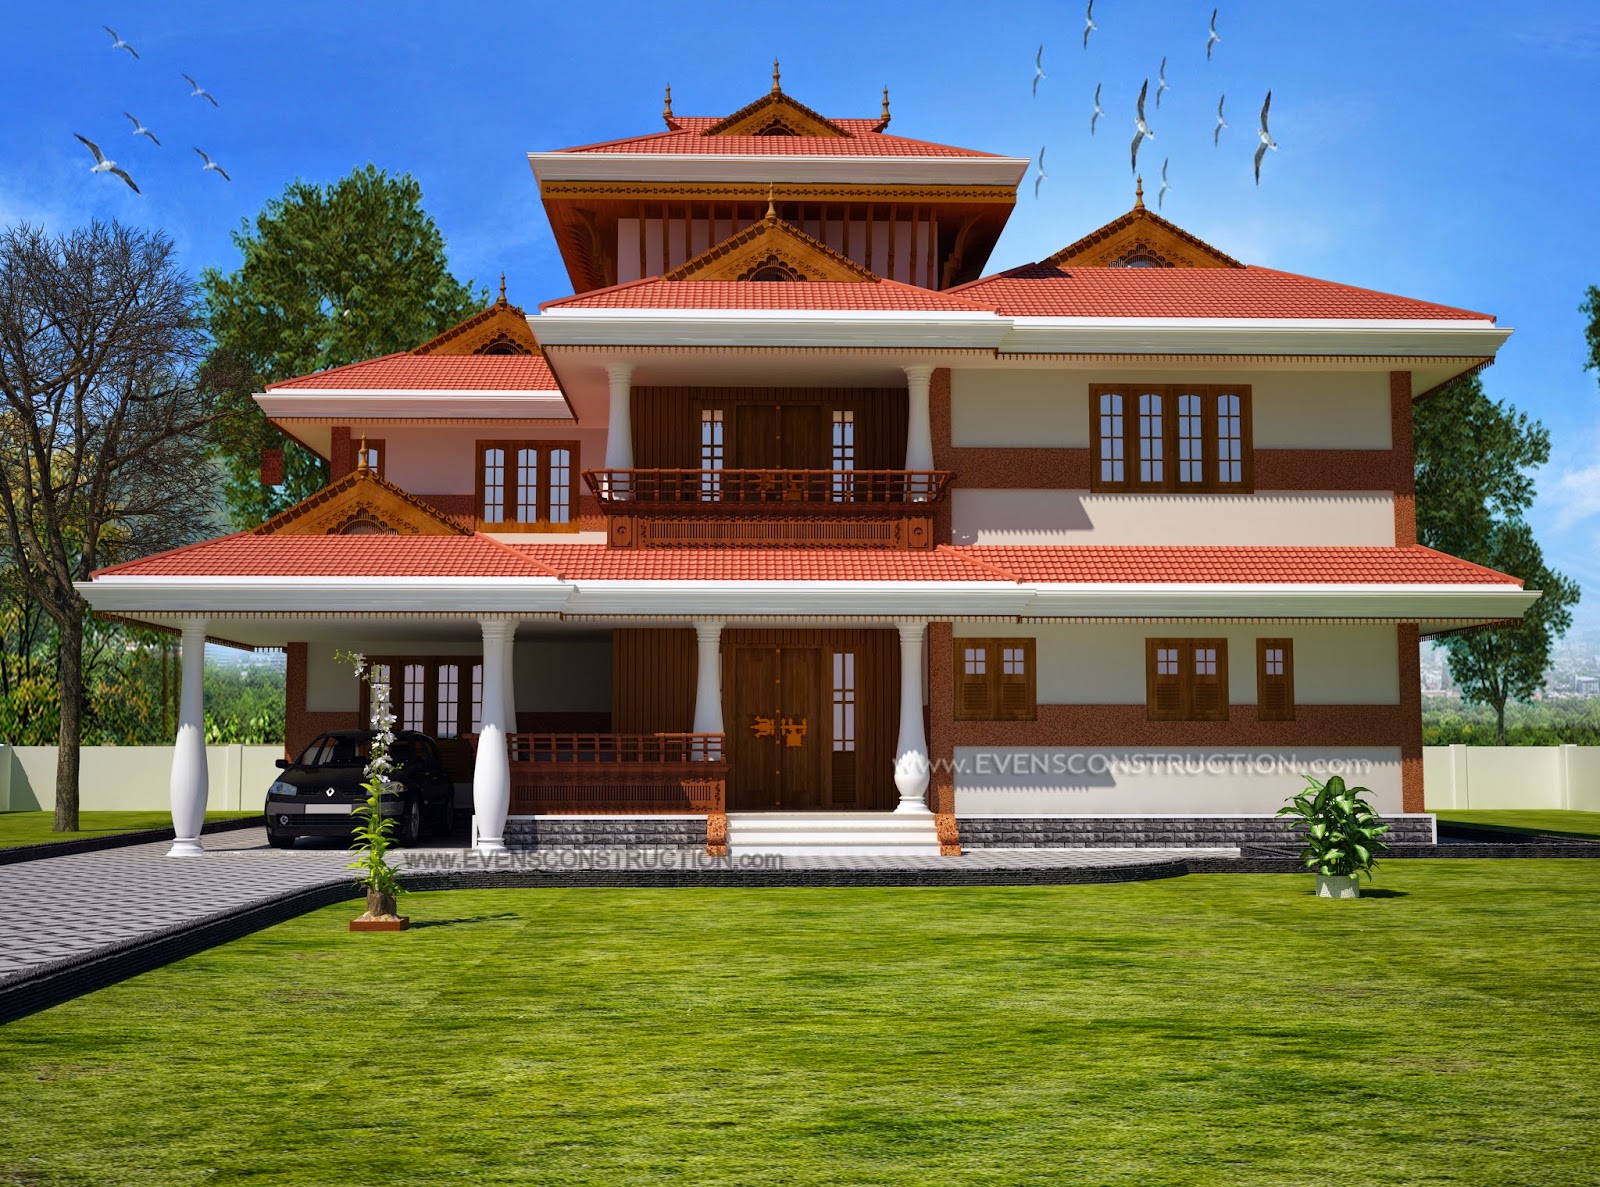 Evens Construction Pvt Ltd: Traditional style Kerala house